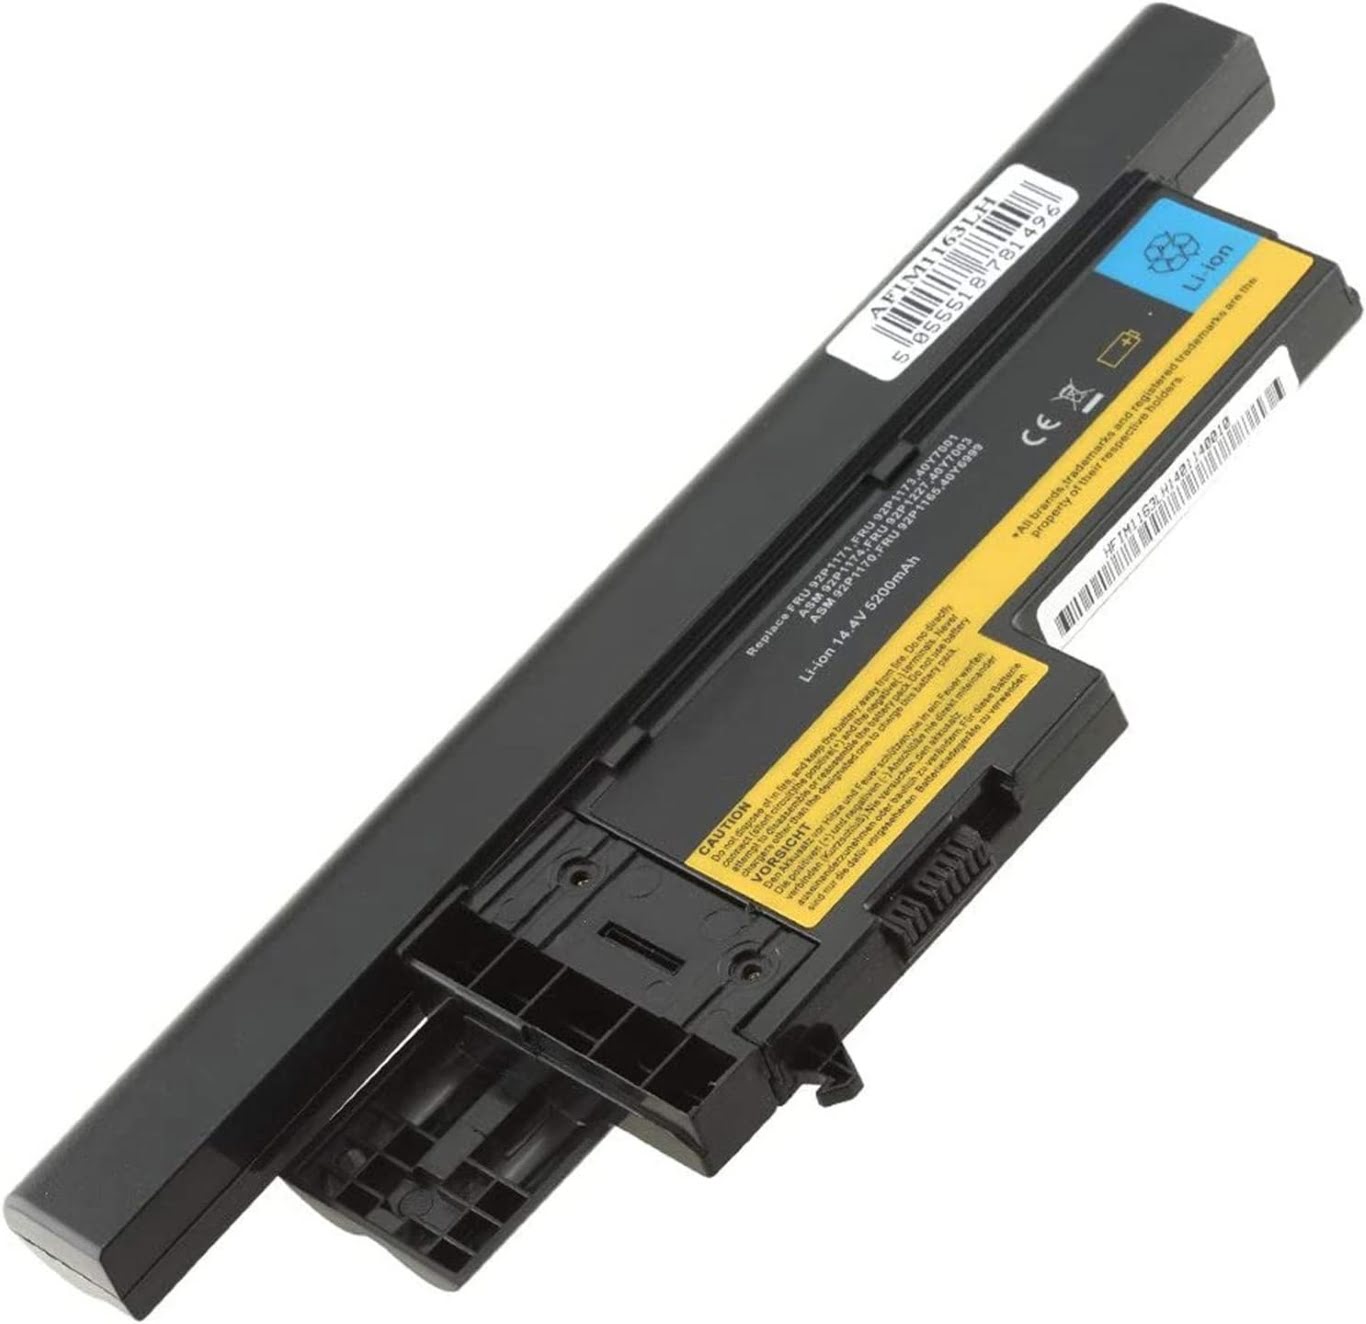 Lenovo 40y6999, 92p1166 Laptop Battery For Thinkpad X61, Thinkpad X61s replacement